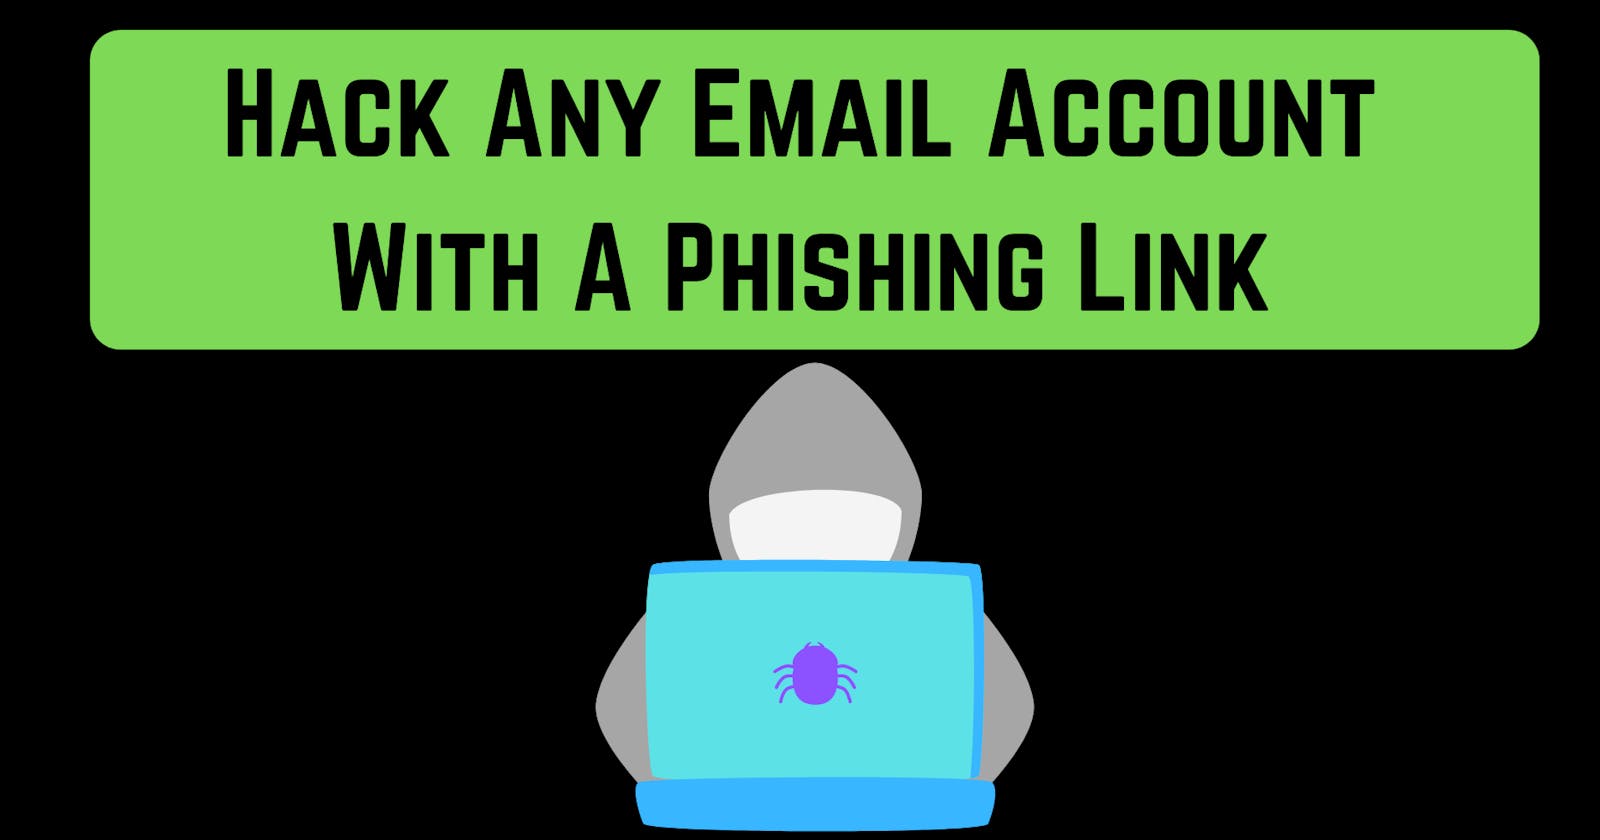 Hack Any Email Account With A Phishing Link